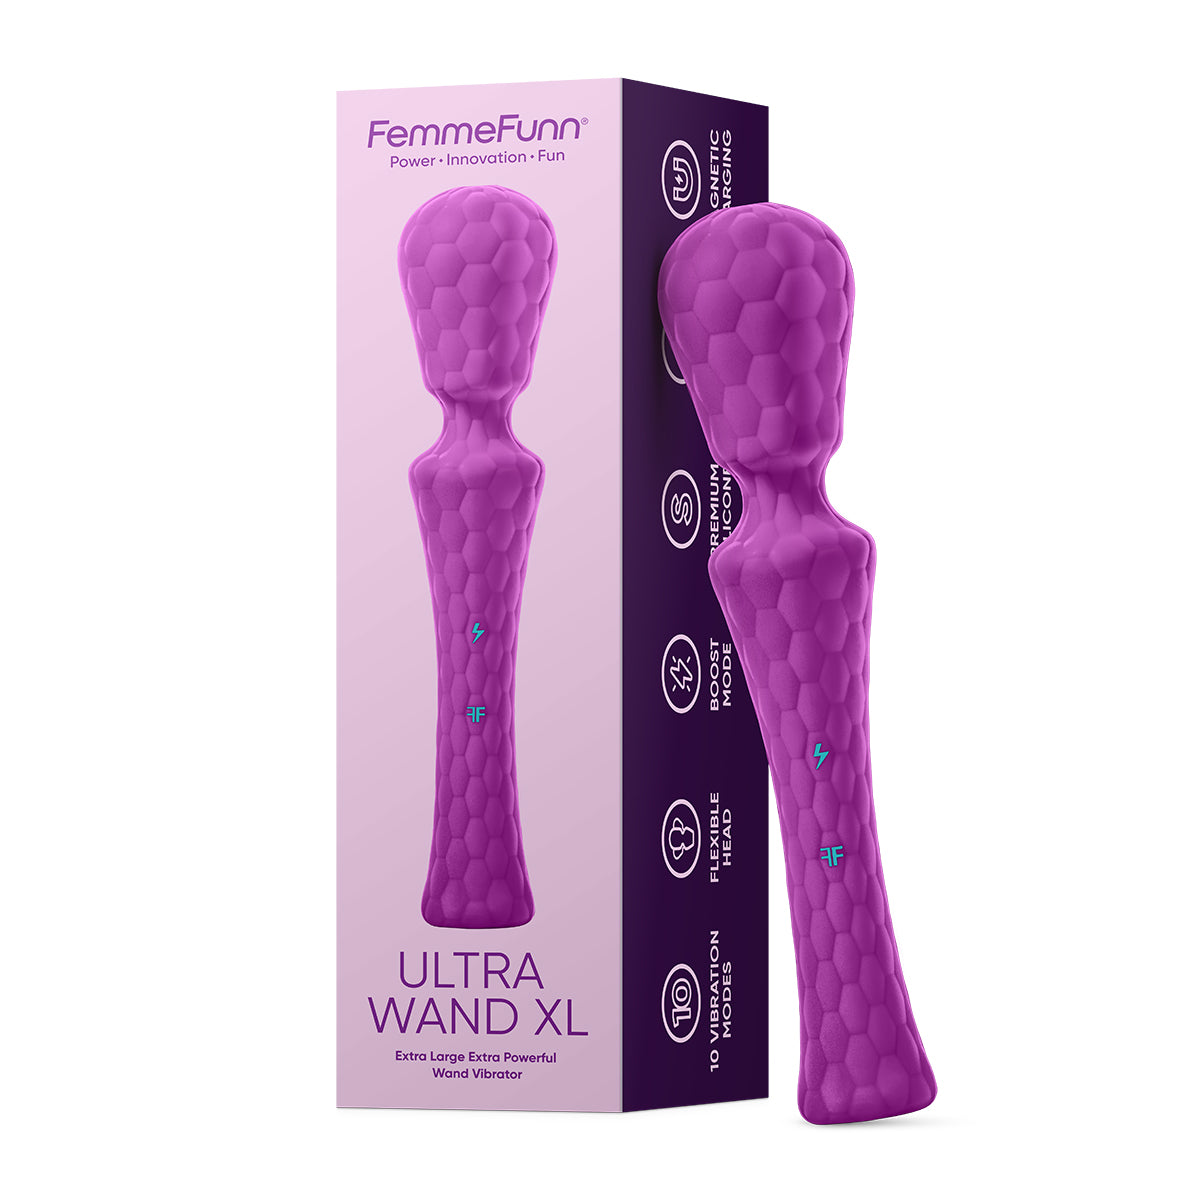 Femme Funn Ultra Wand XL - Purple Intimates Adult Boutique